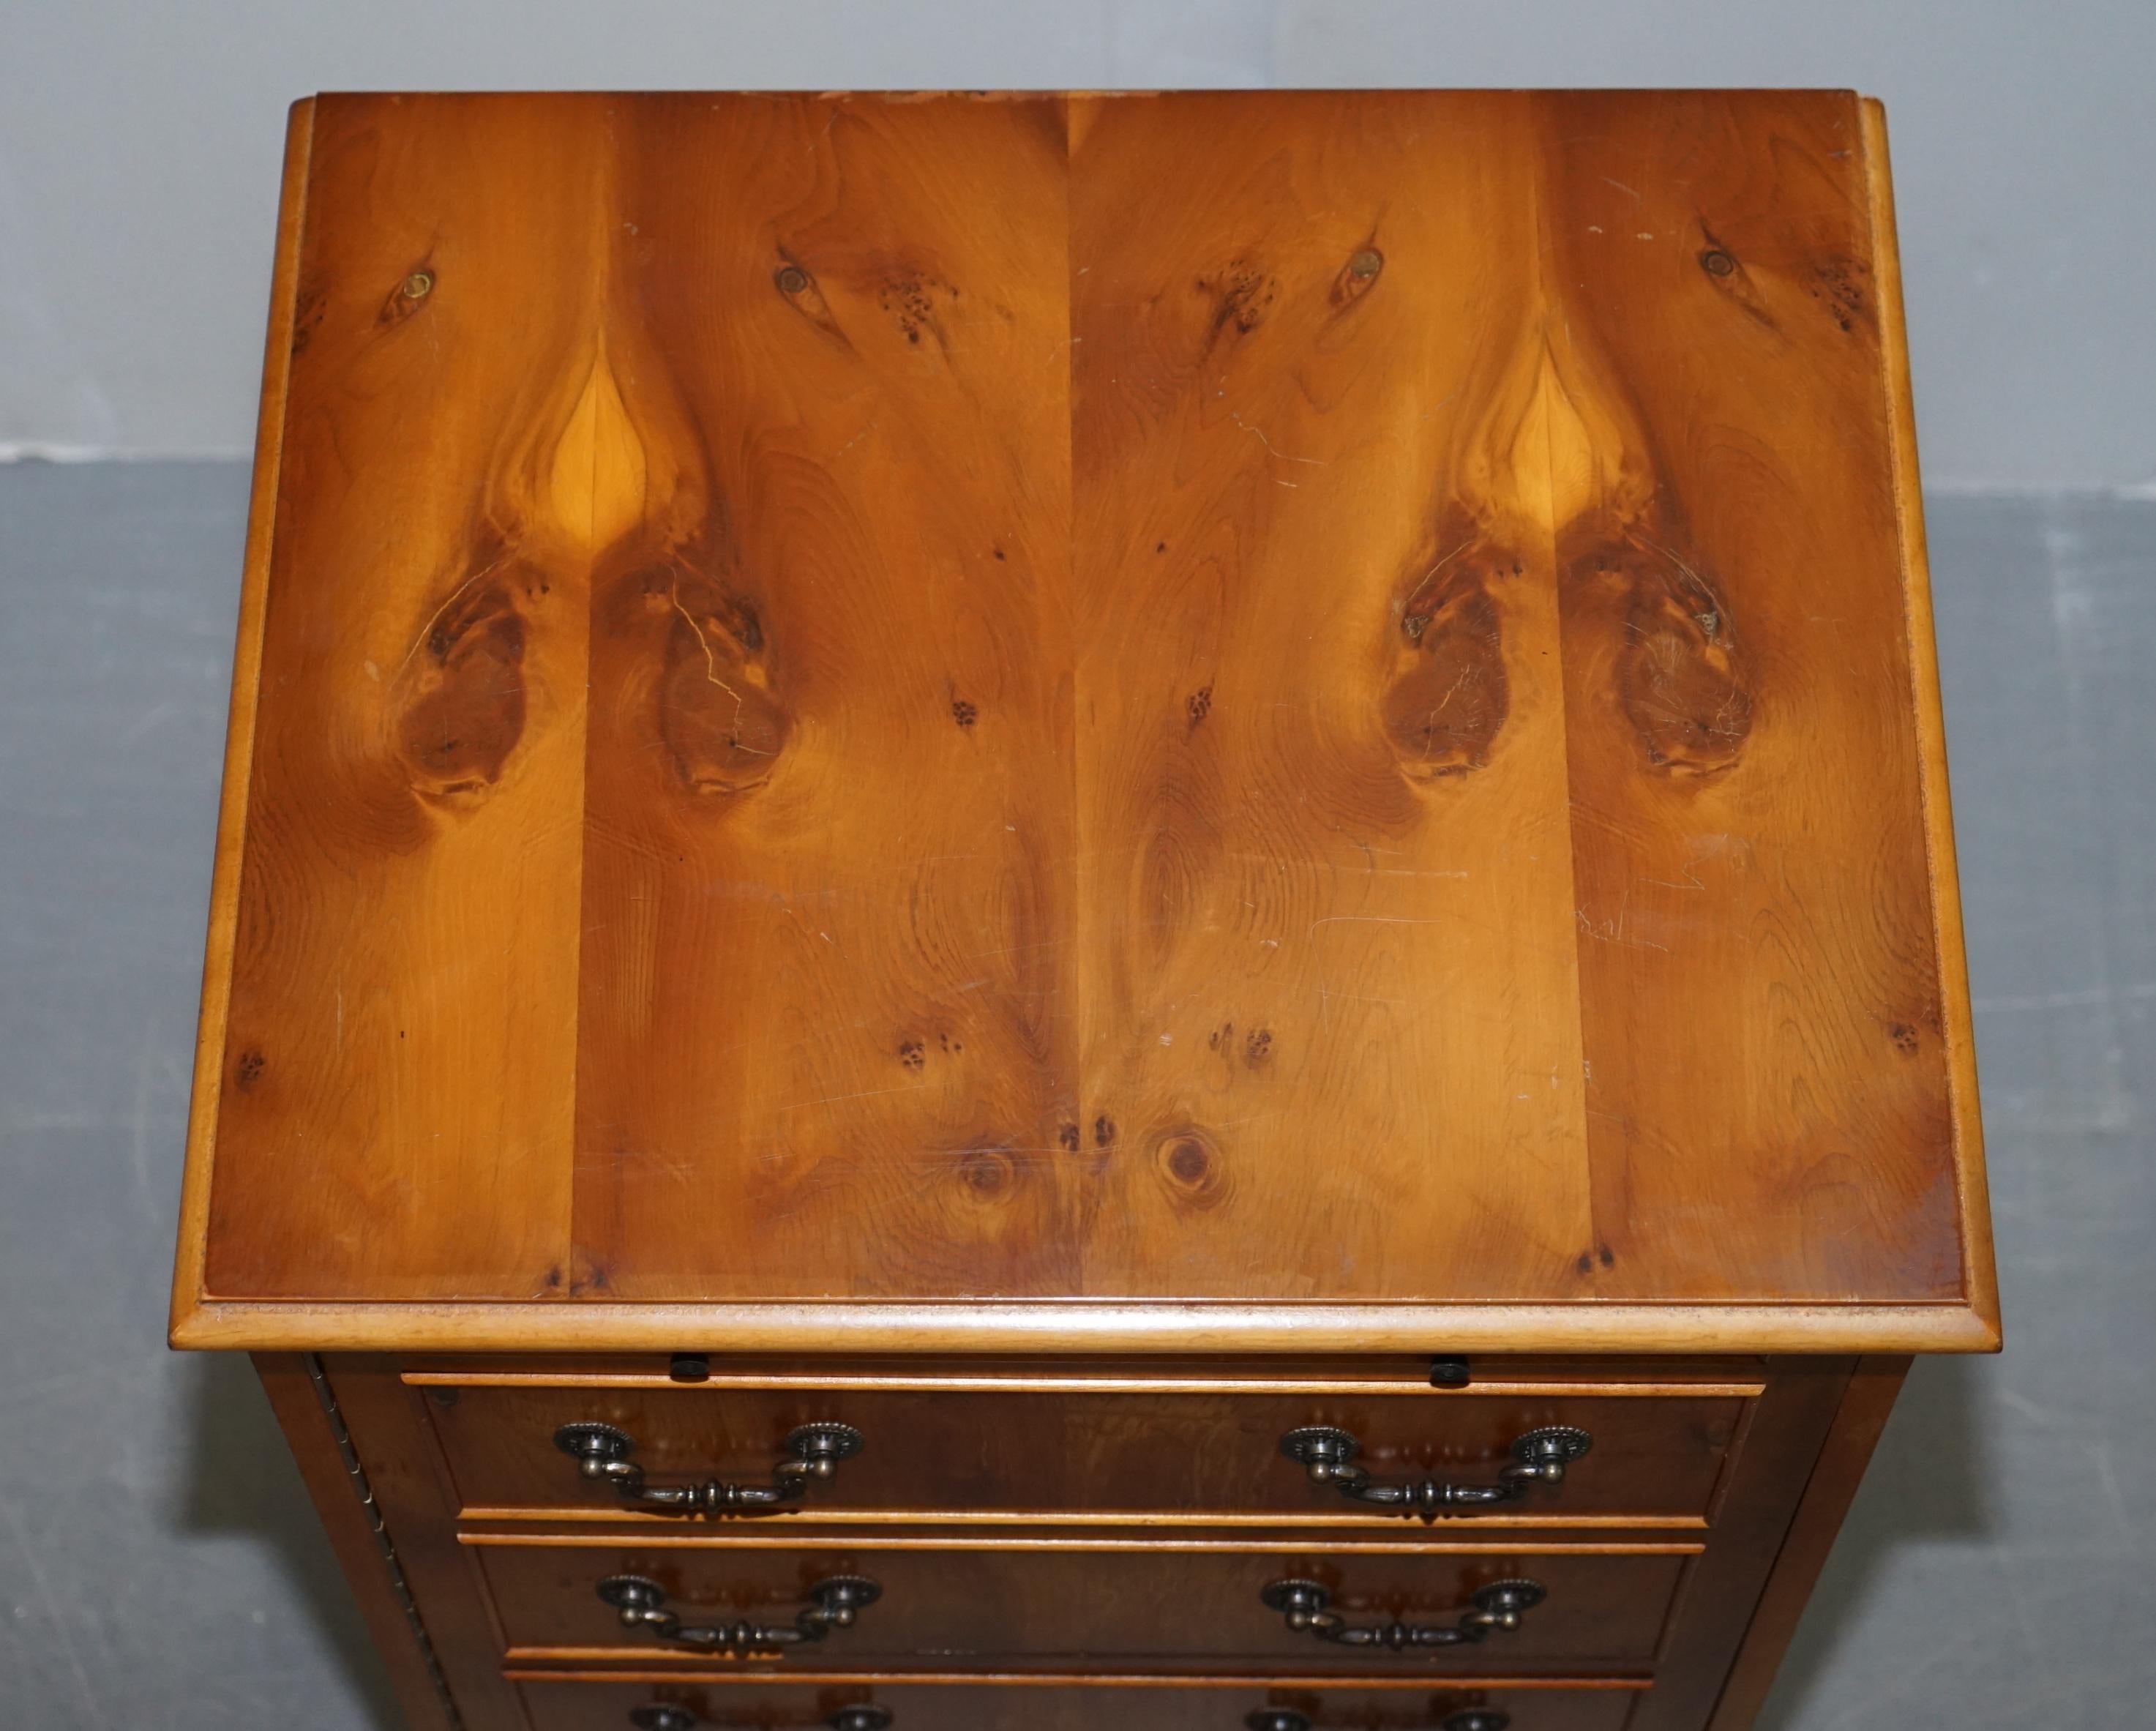 English Burr Yew Wood Record Player Cabinet Cupboard Hidden as Regency Chest of Drawers